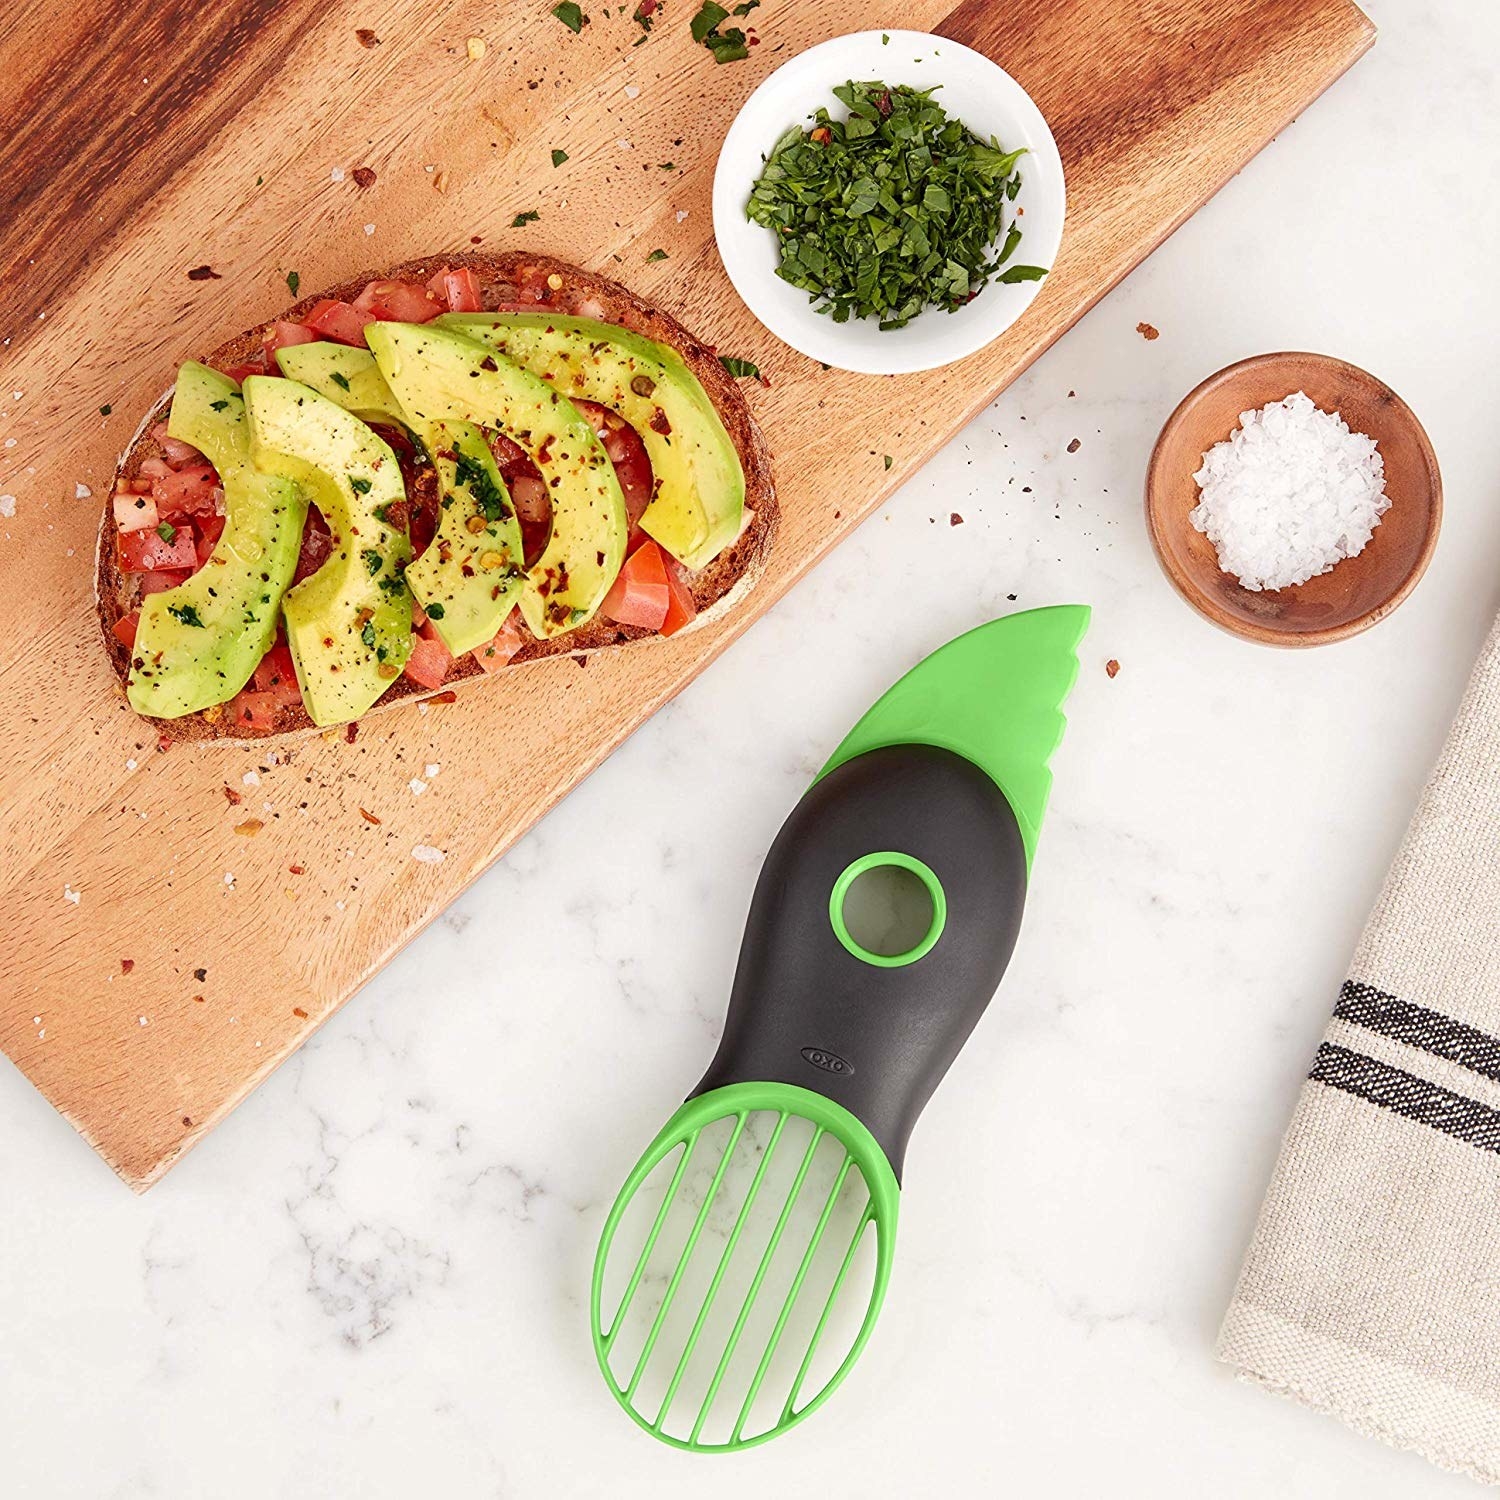 The avocado tool with pitter, knife, and slicer built in next to some avocado toast